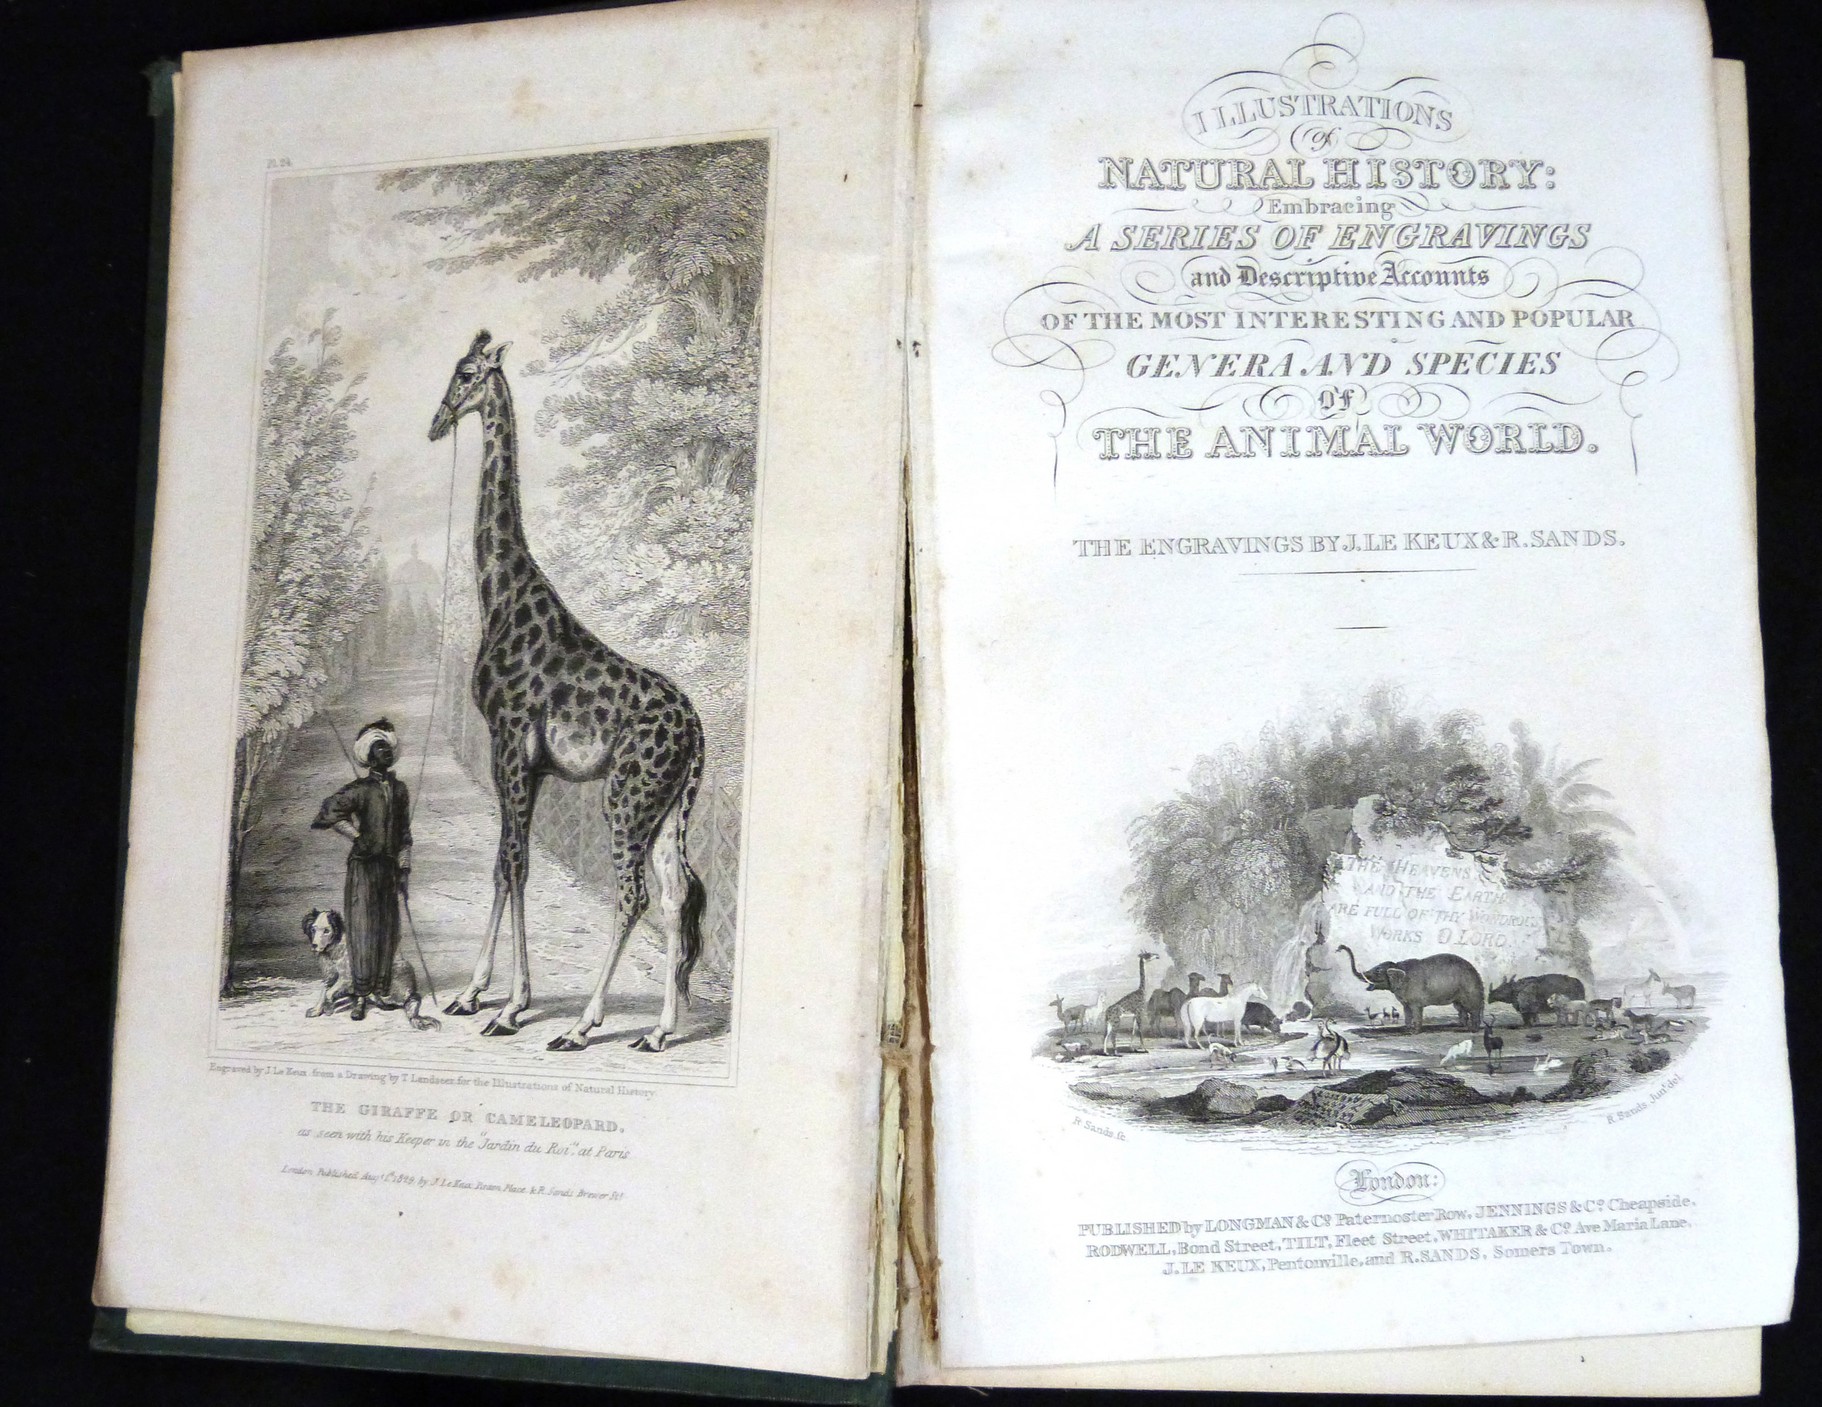 ANON: THE ILLUSTRATIONS OF NATURAL HISTORY EMBRACING A SERIES OF ENGRAVINGS AND DESCRIPTIVE ACCOUNTS